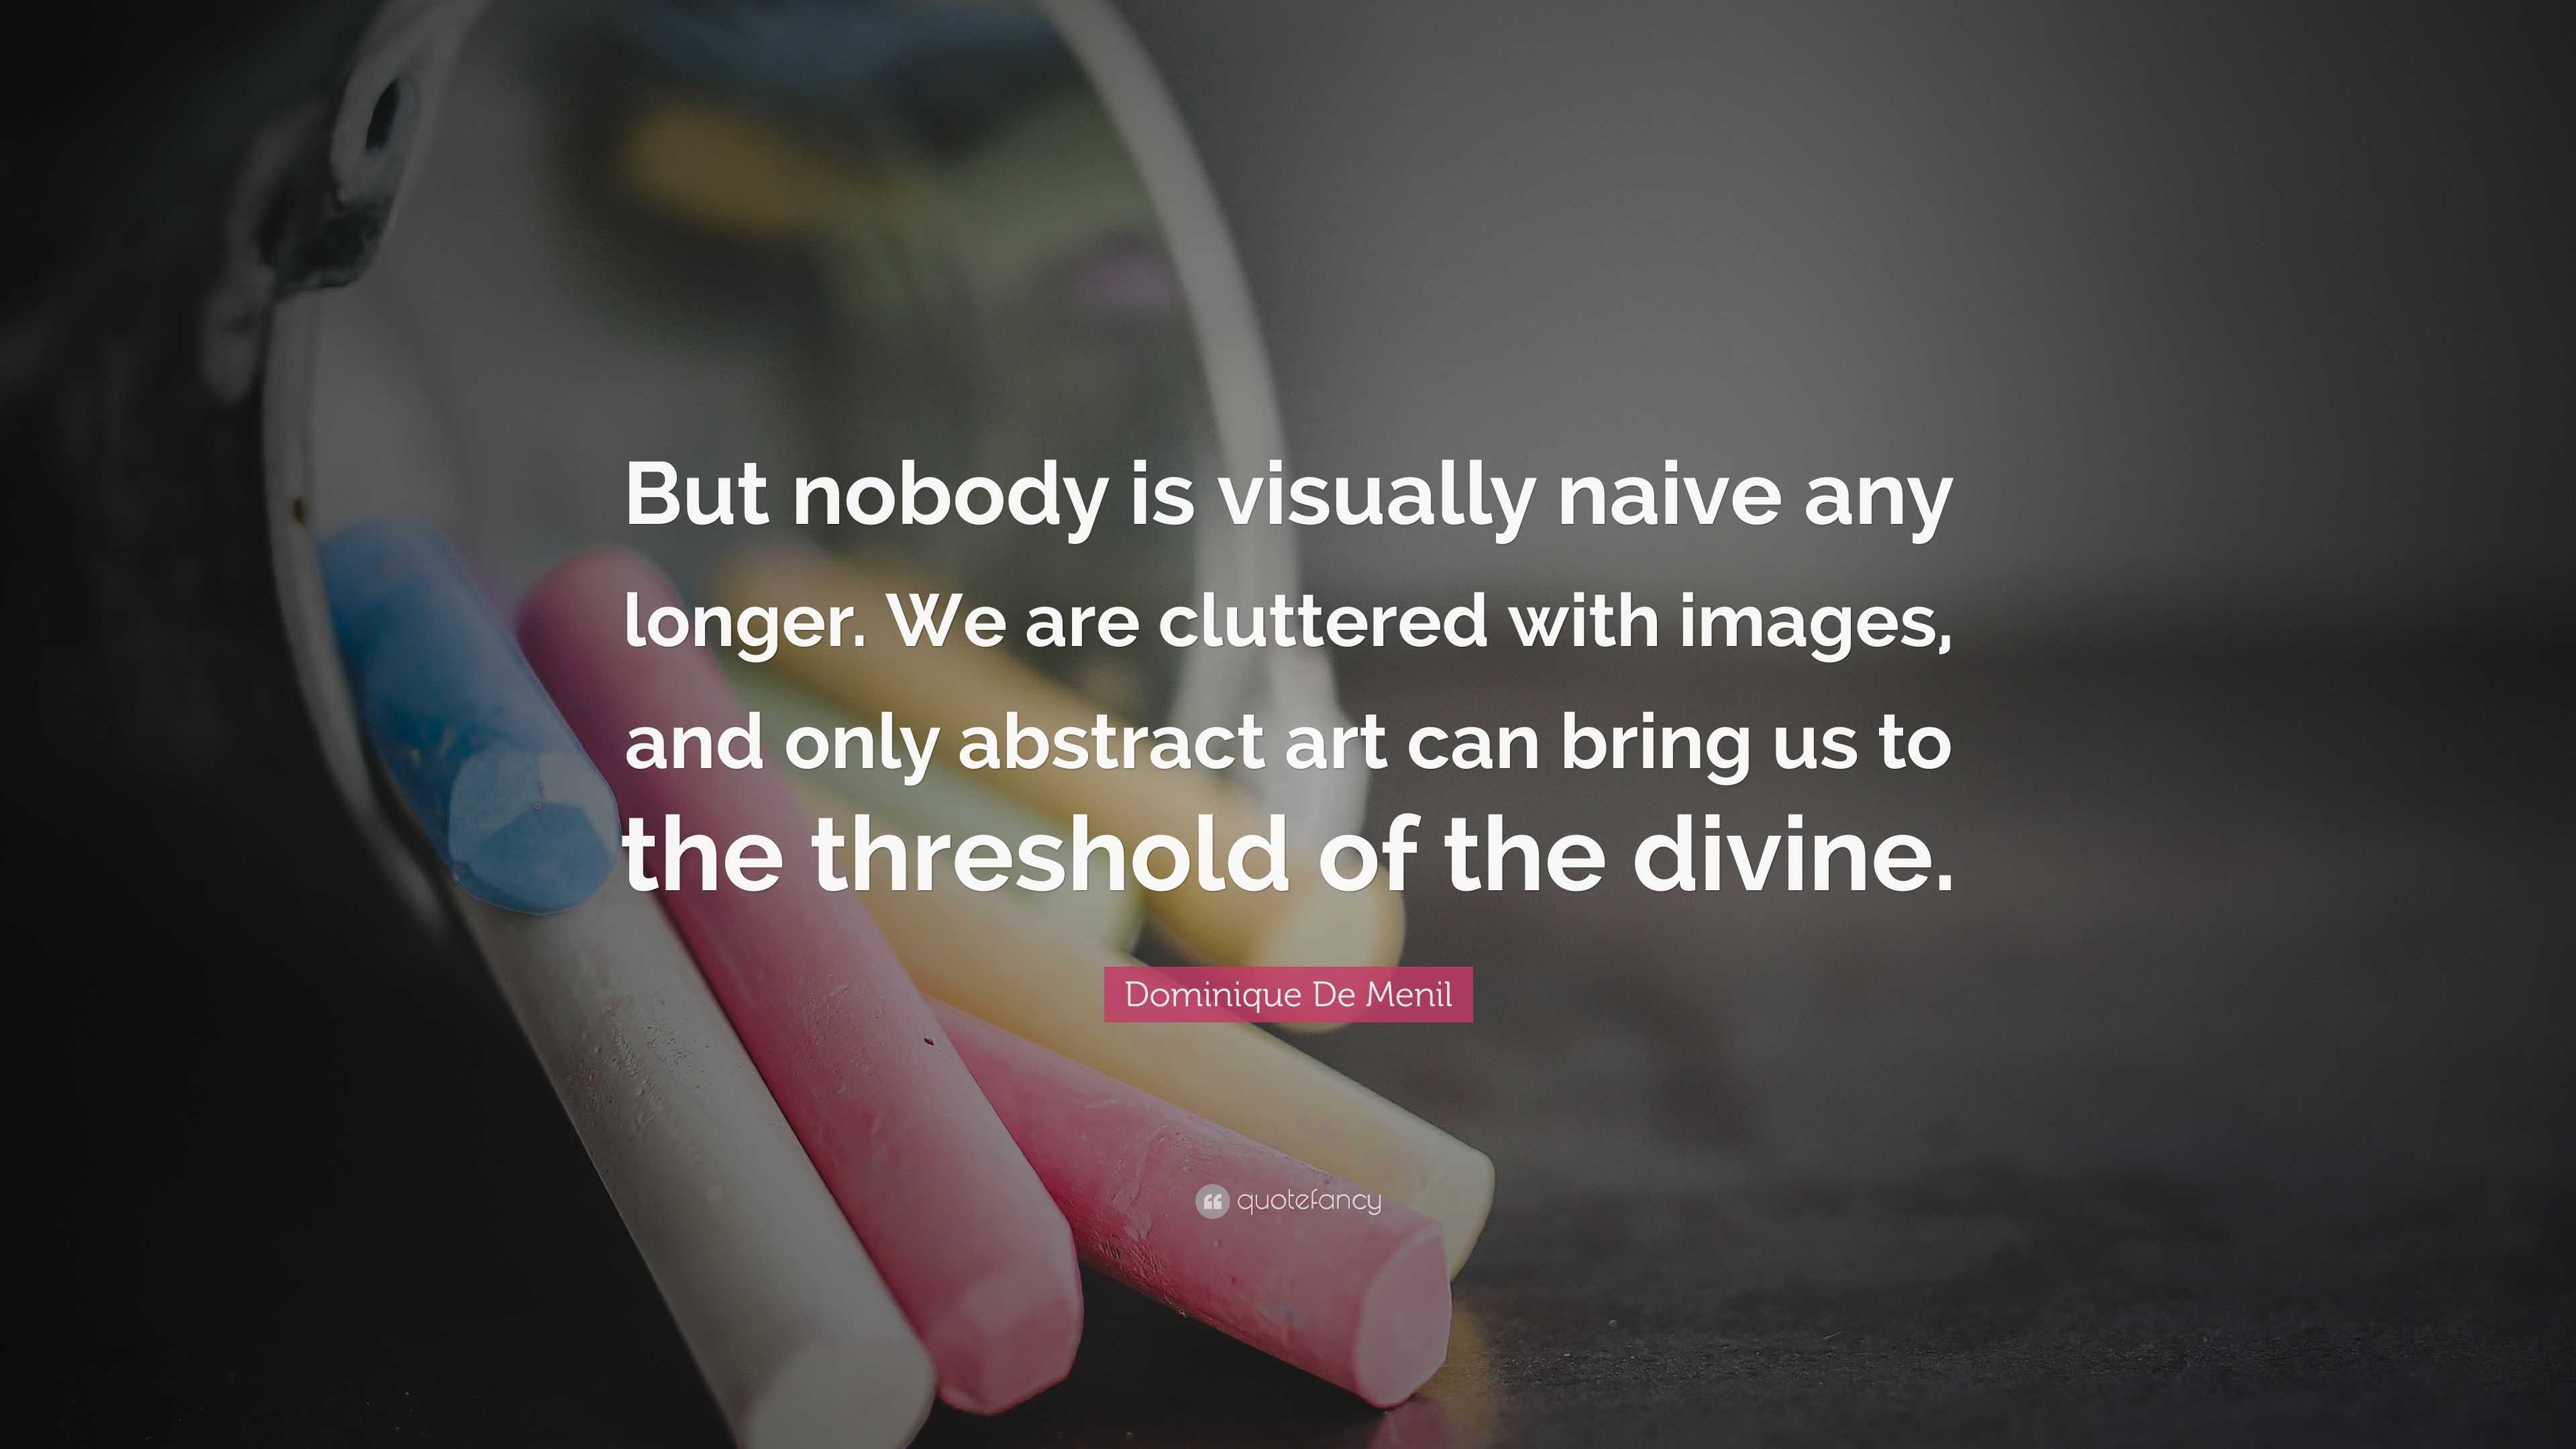 Dominique De Menil Quote: “But nobody is visually naive any longer. We are  cluttered with images, and only abstract art can bring us to the thresho”